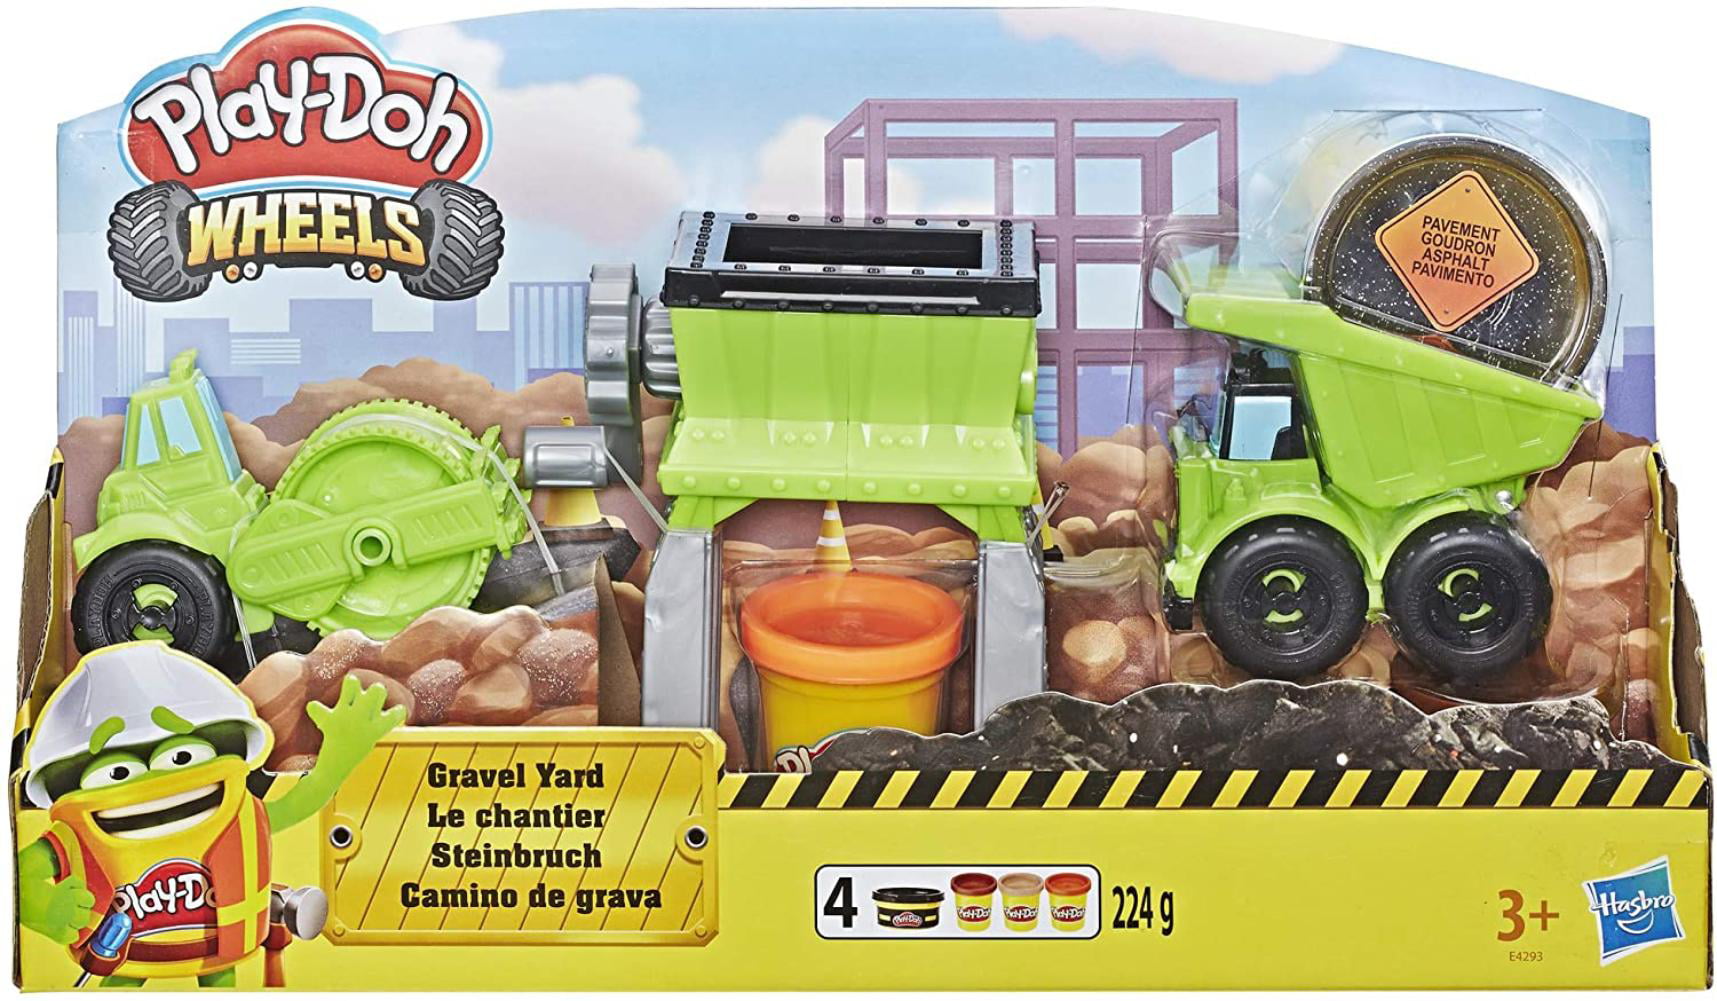 Play-Doh Wheels Gravel Yard Construction Toy, Gravel grinder with 